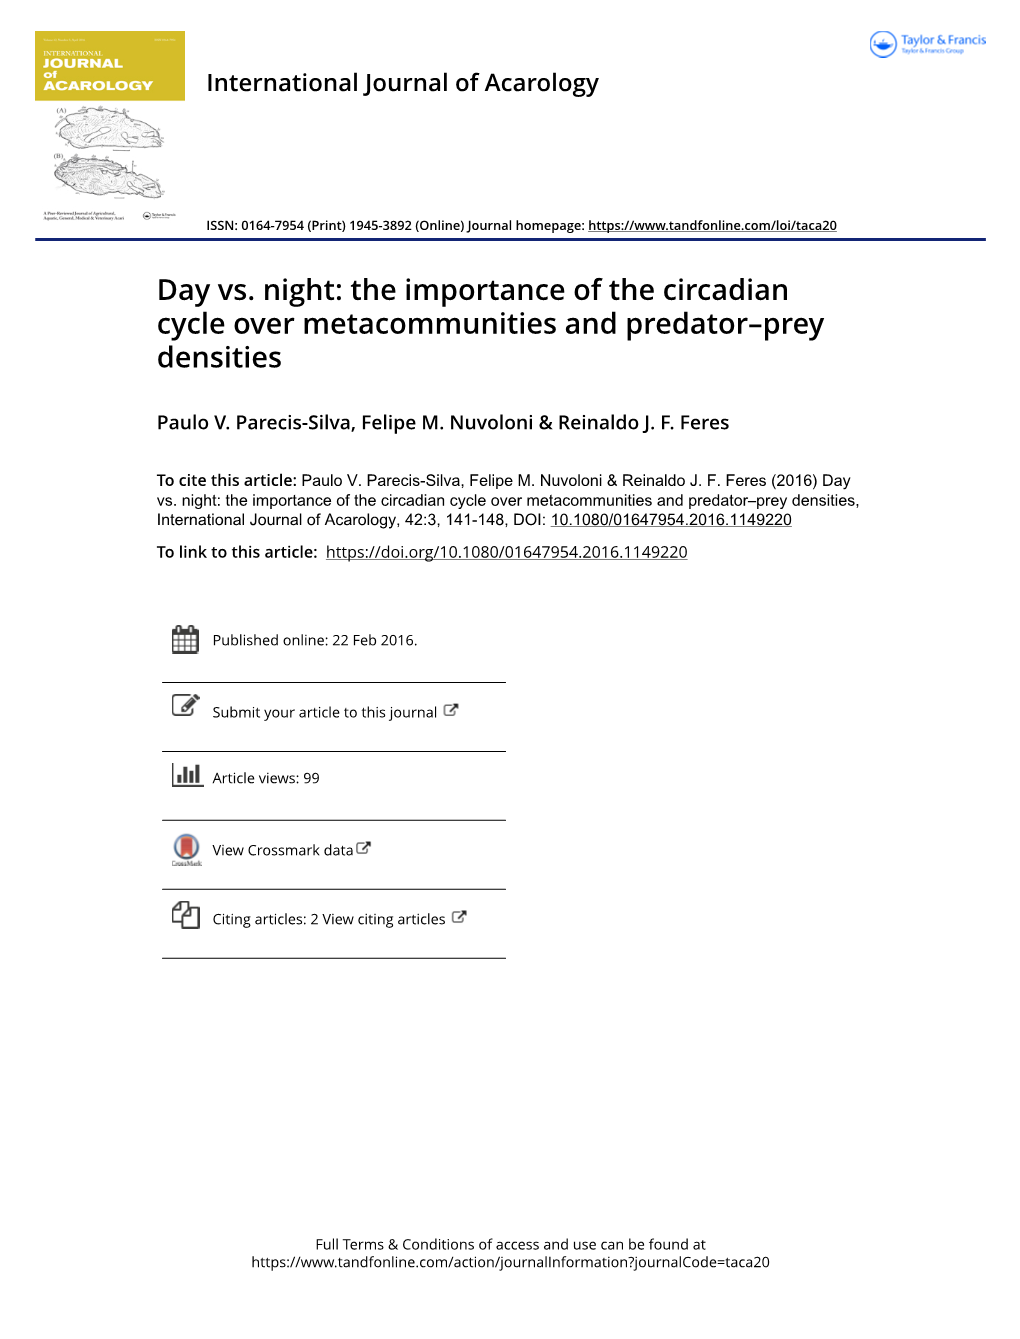 The Importance of the Circadian Cycle Over Metacommunities and Predator–Prey Densities